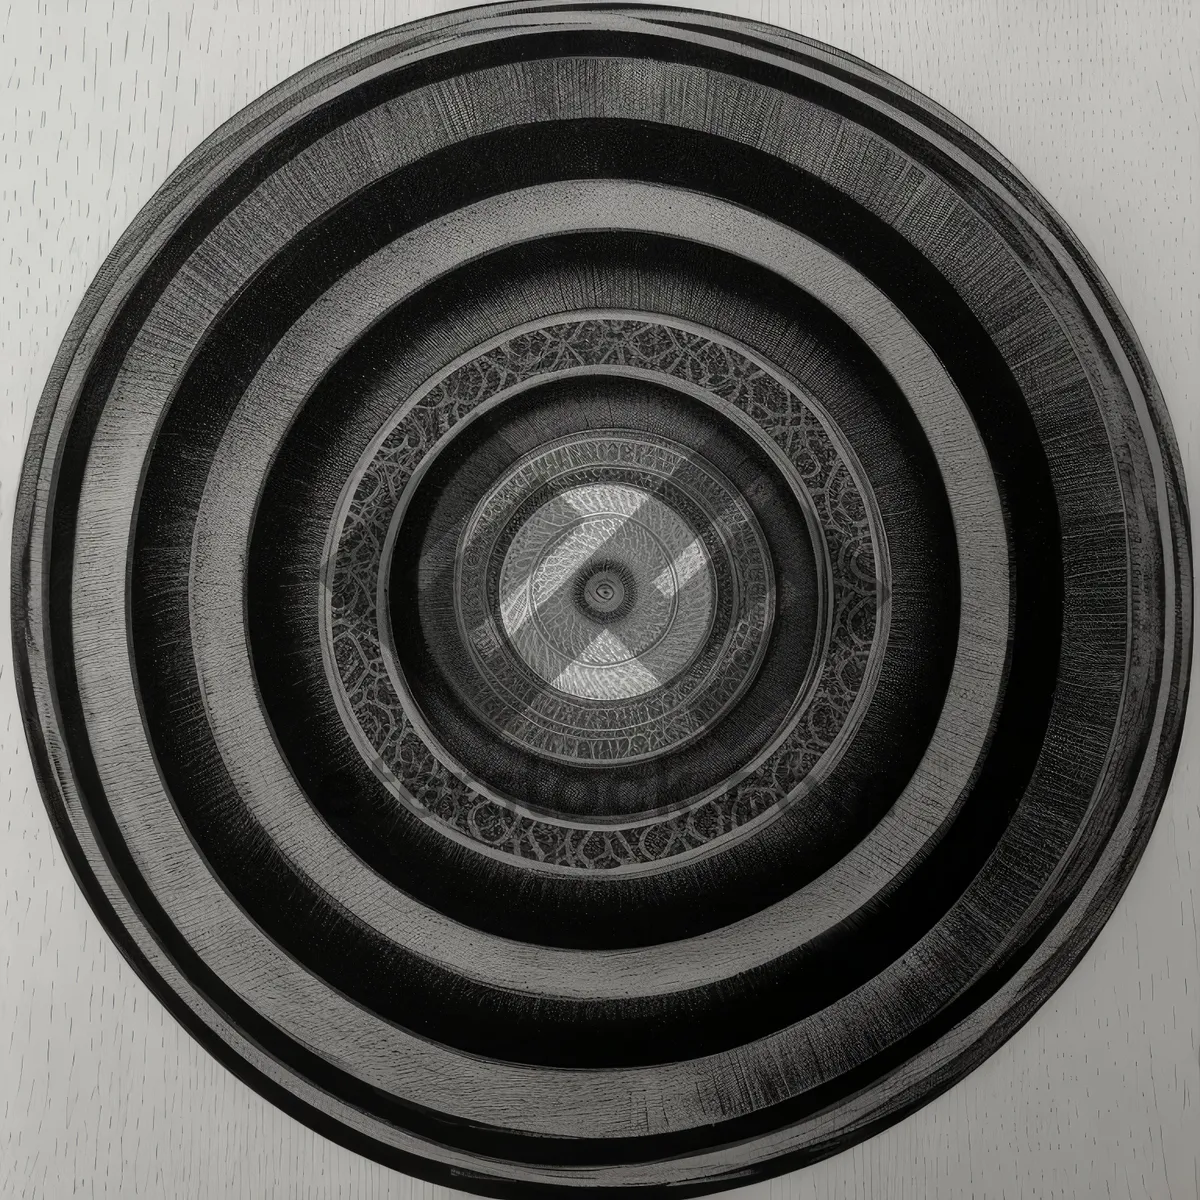 Picture of Black Circular Speaker Button for Pushing Music Sound